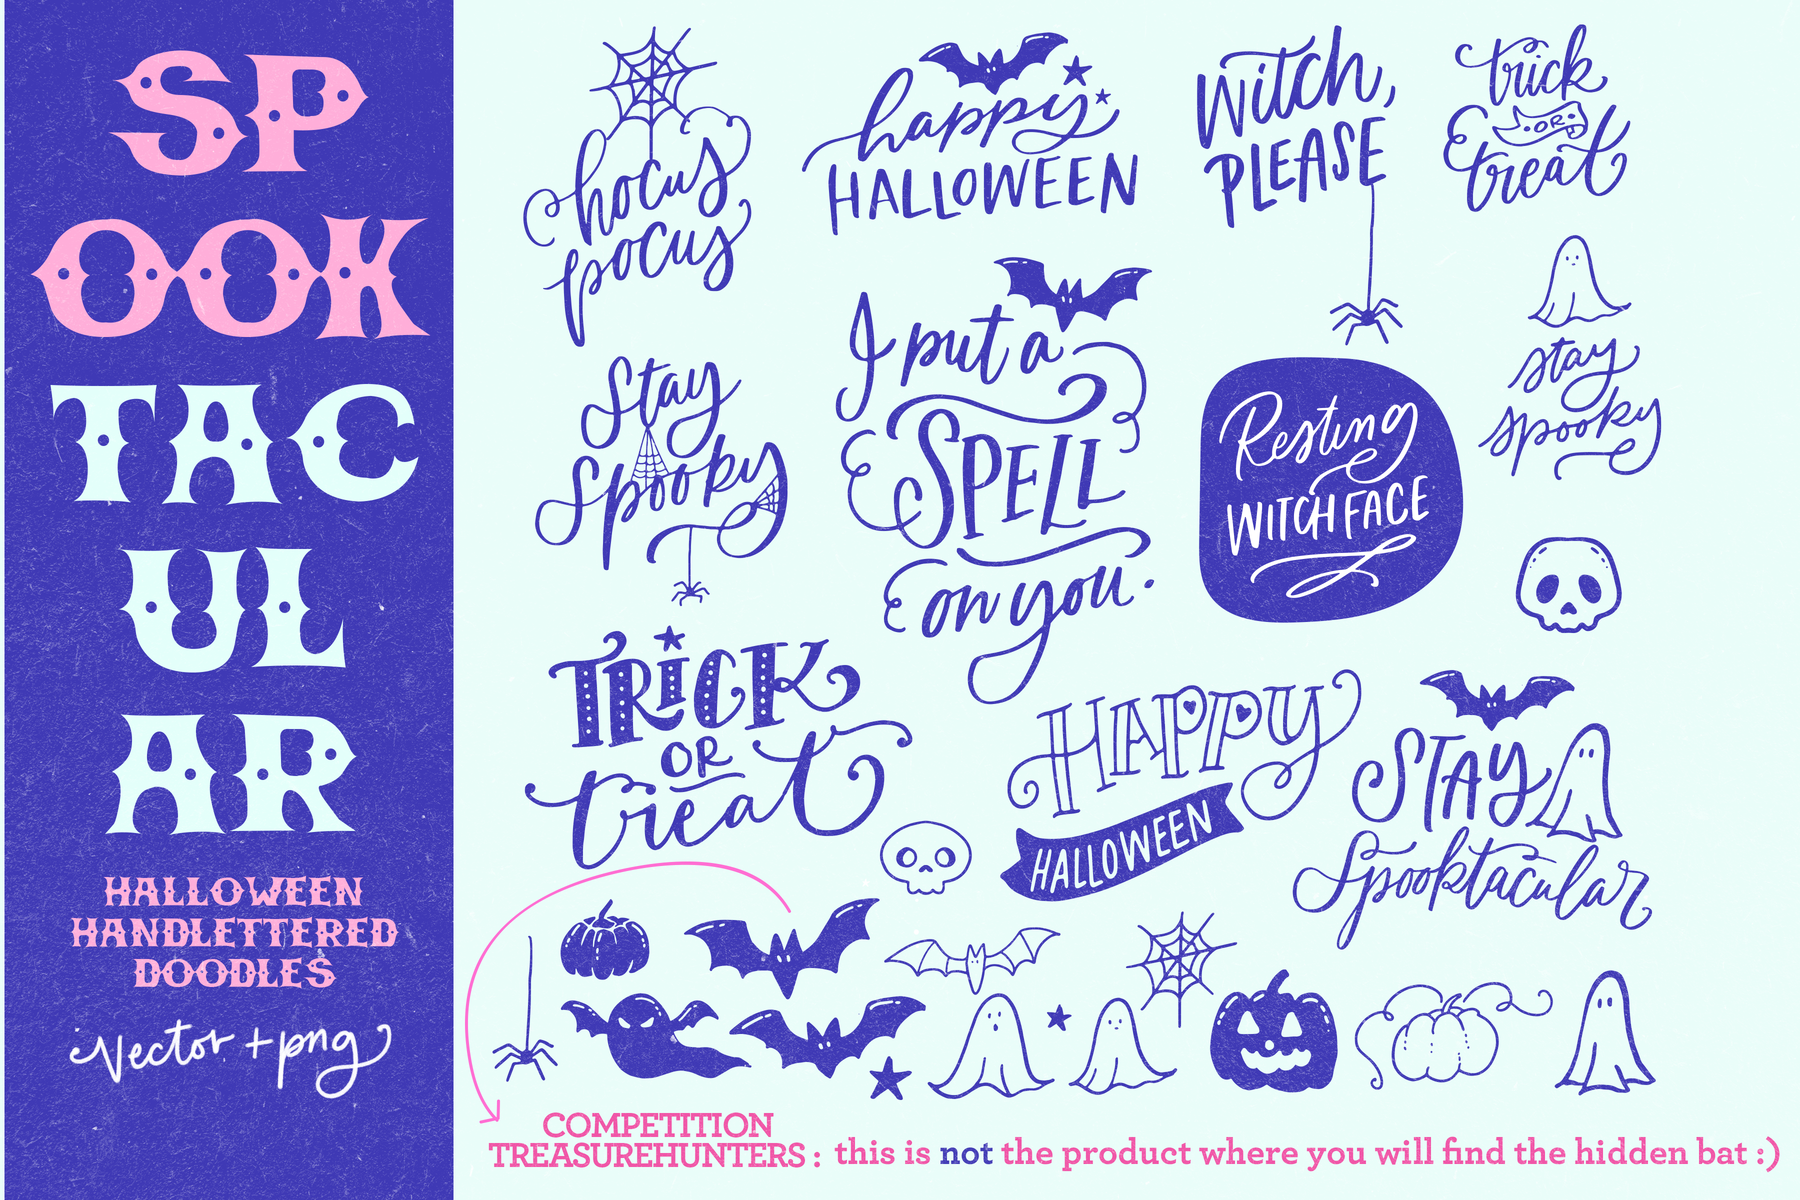 Spooktacular Handlettered Doodles main product image by Nicky Laatz